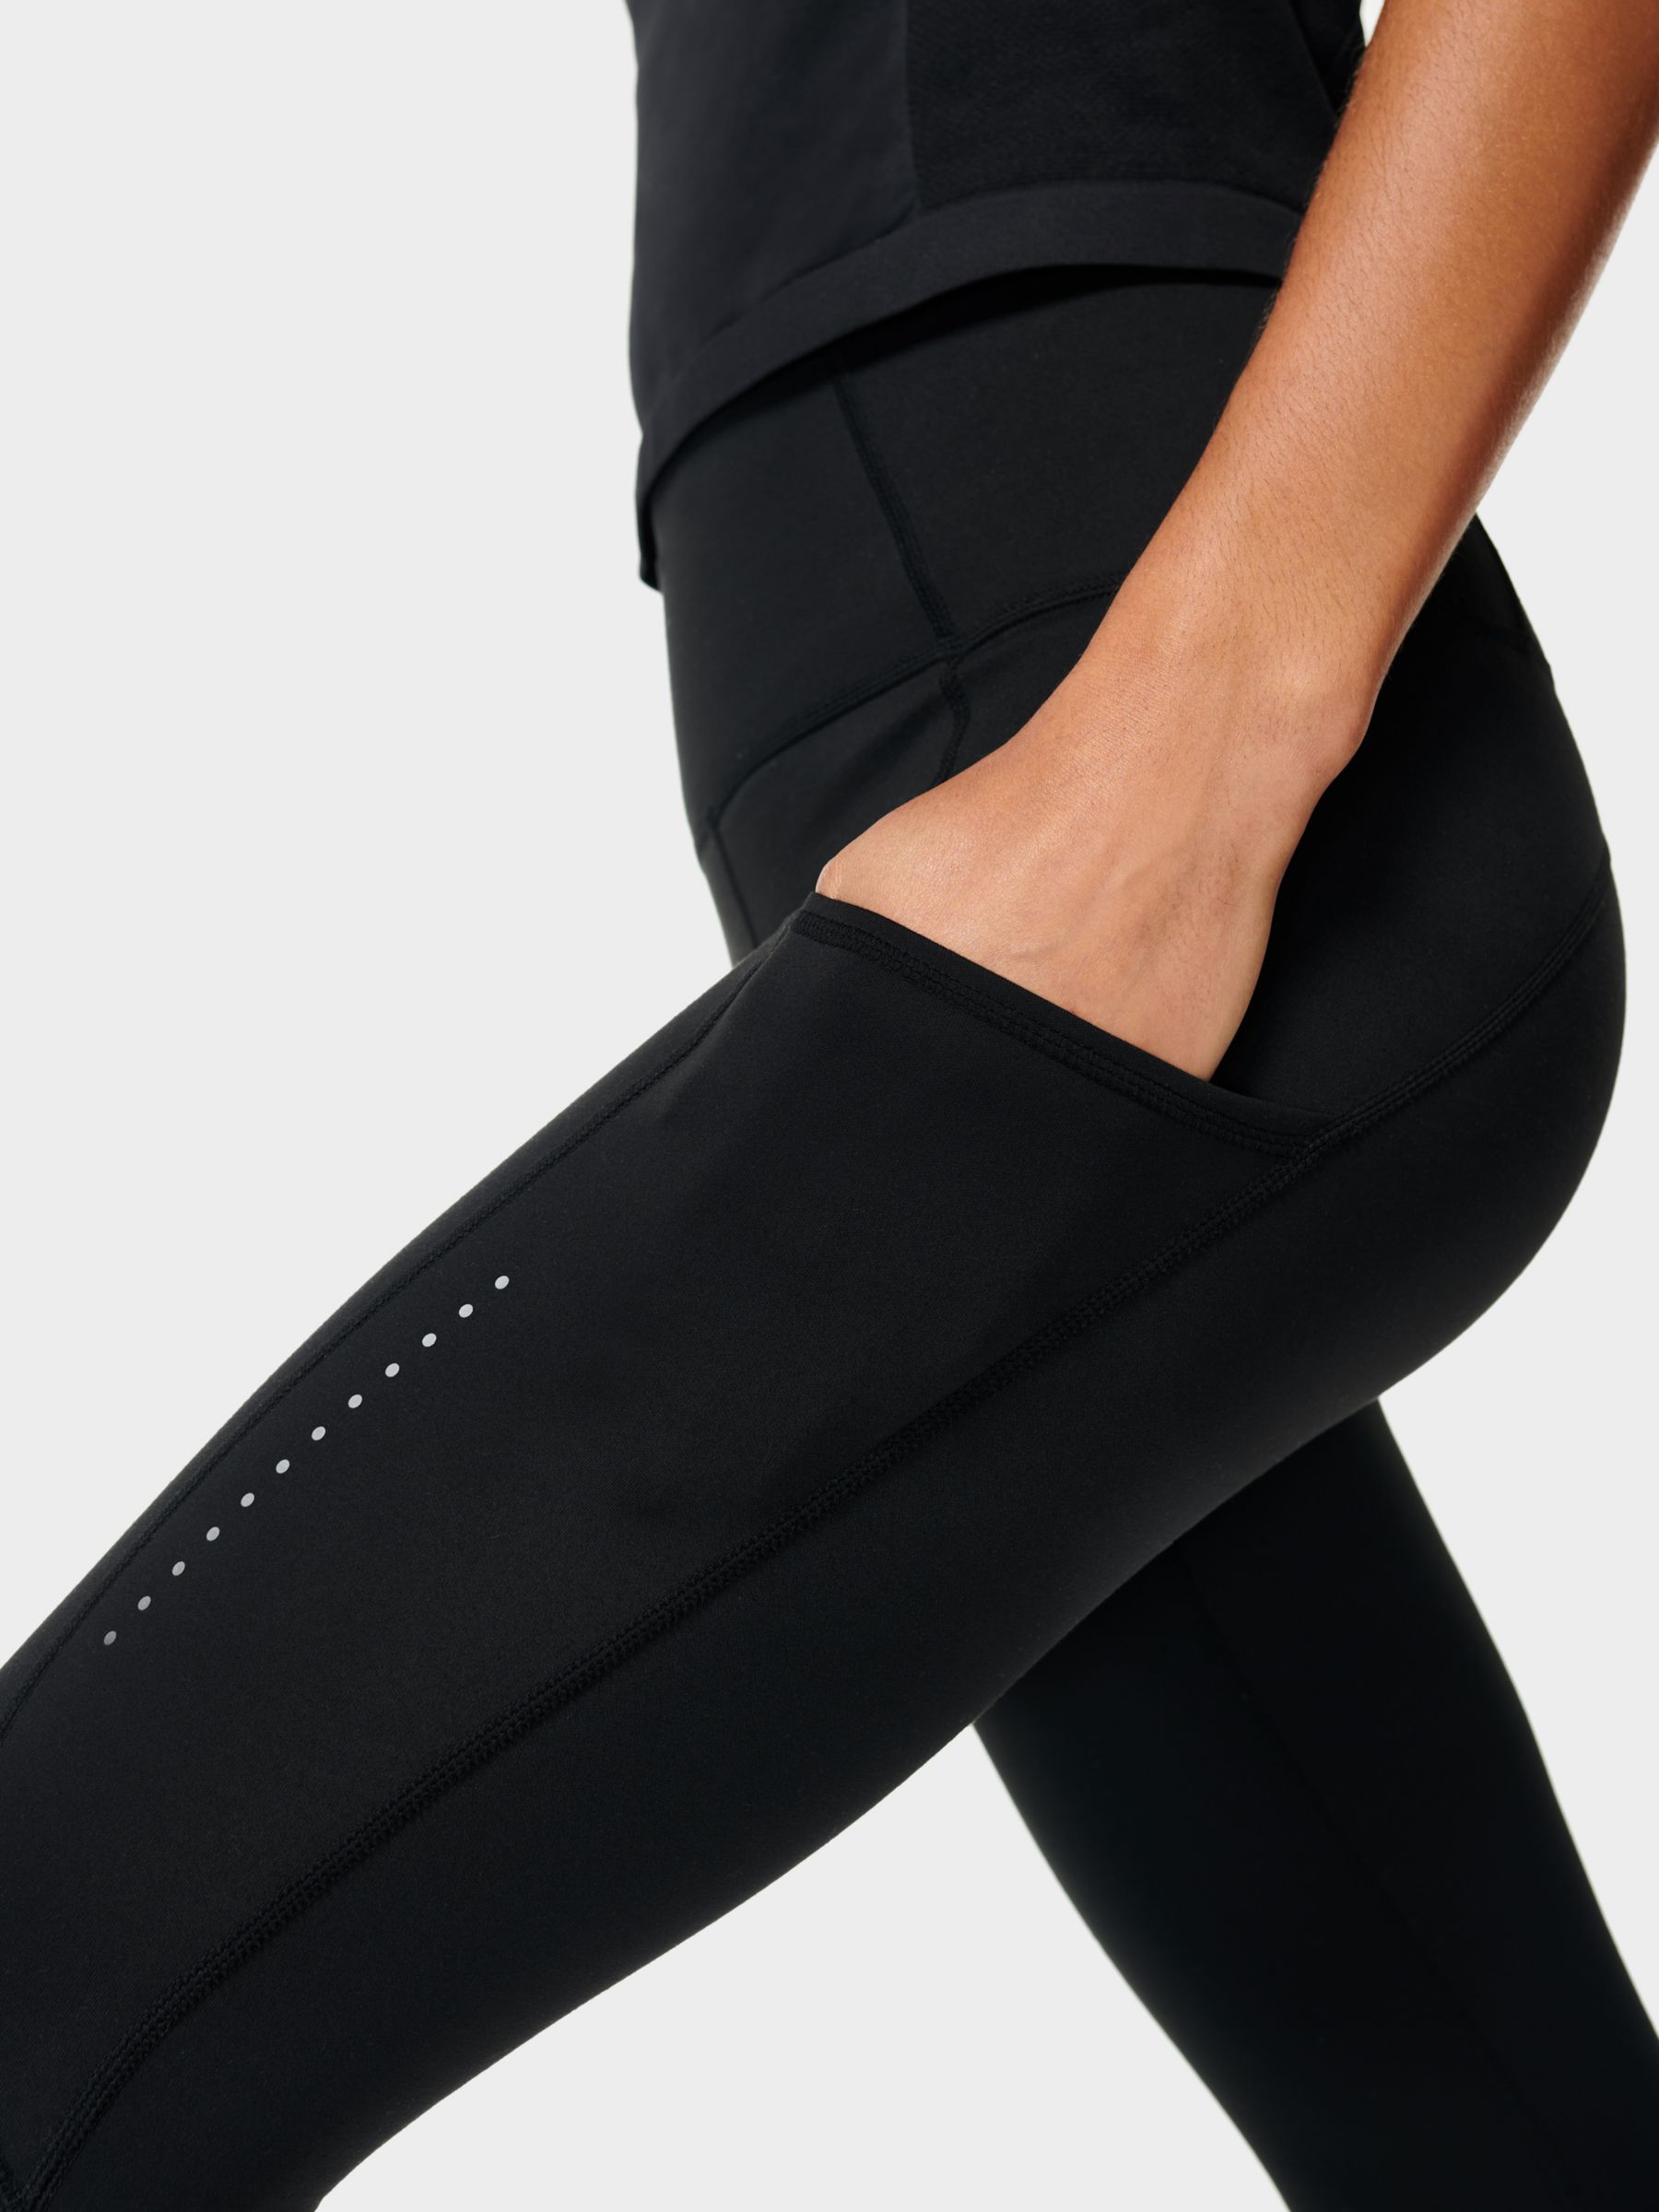 Sweaty Betty Review: Thermal Run Leggings and Glisten LS - Agent